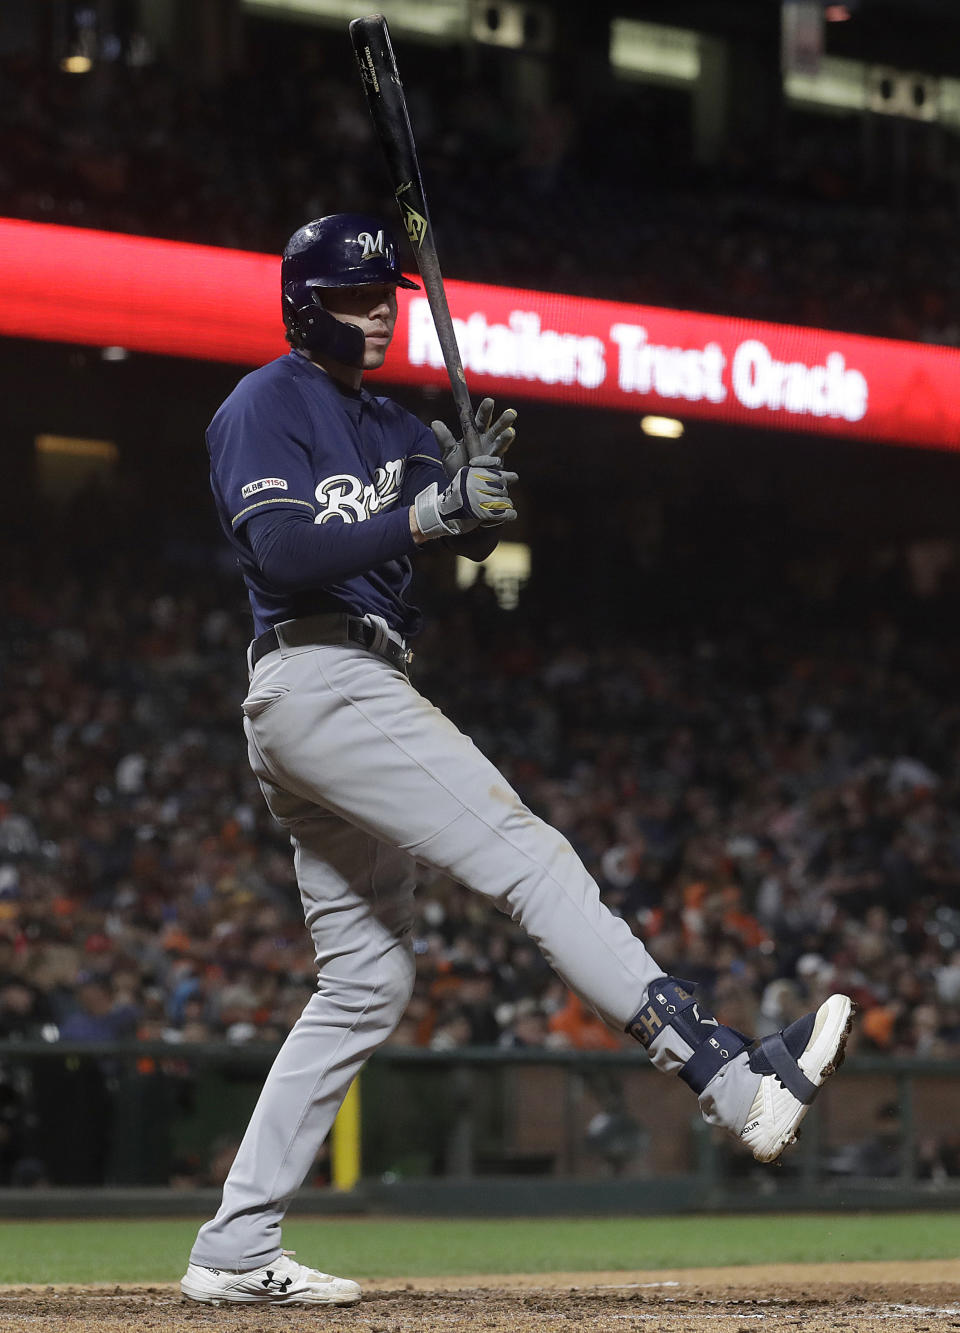 Milwaukee Brewers' Christian Yelich strikes out against the San Francisco Giants during the ninth inning of a baseball game in San Francisco, Friday, June 14, 2019. (AP Photo/Jeff Chiu)